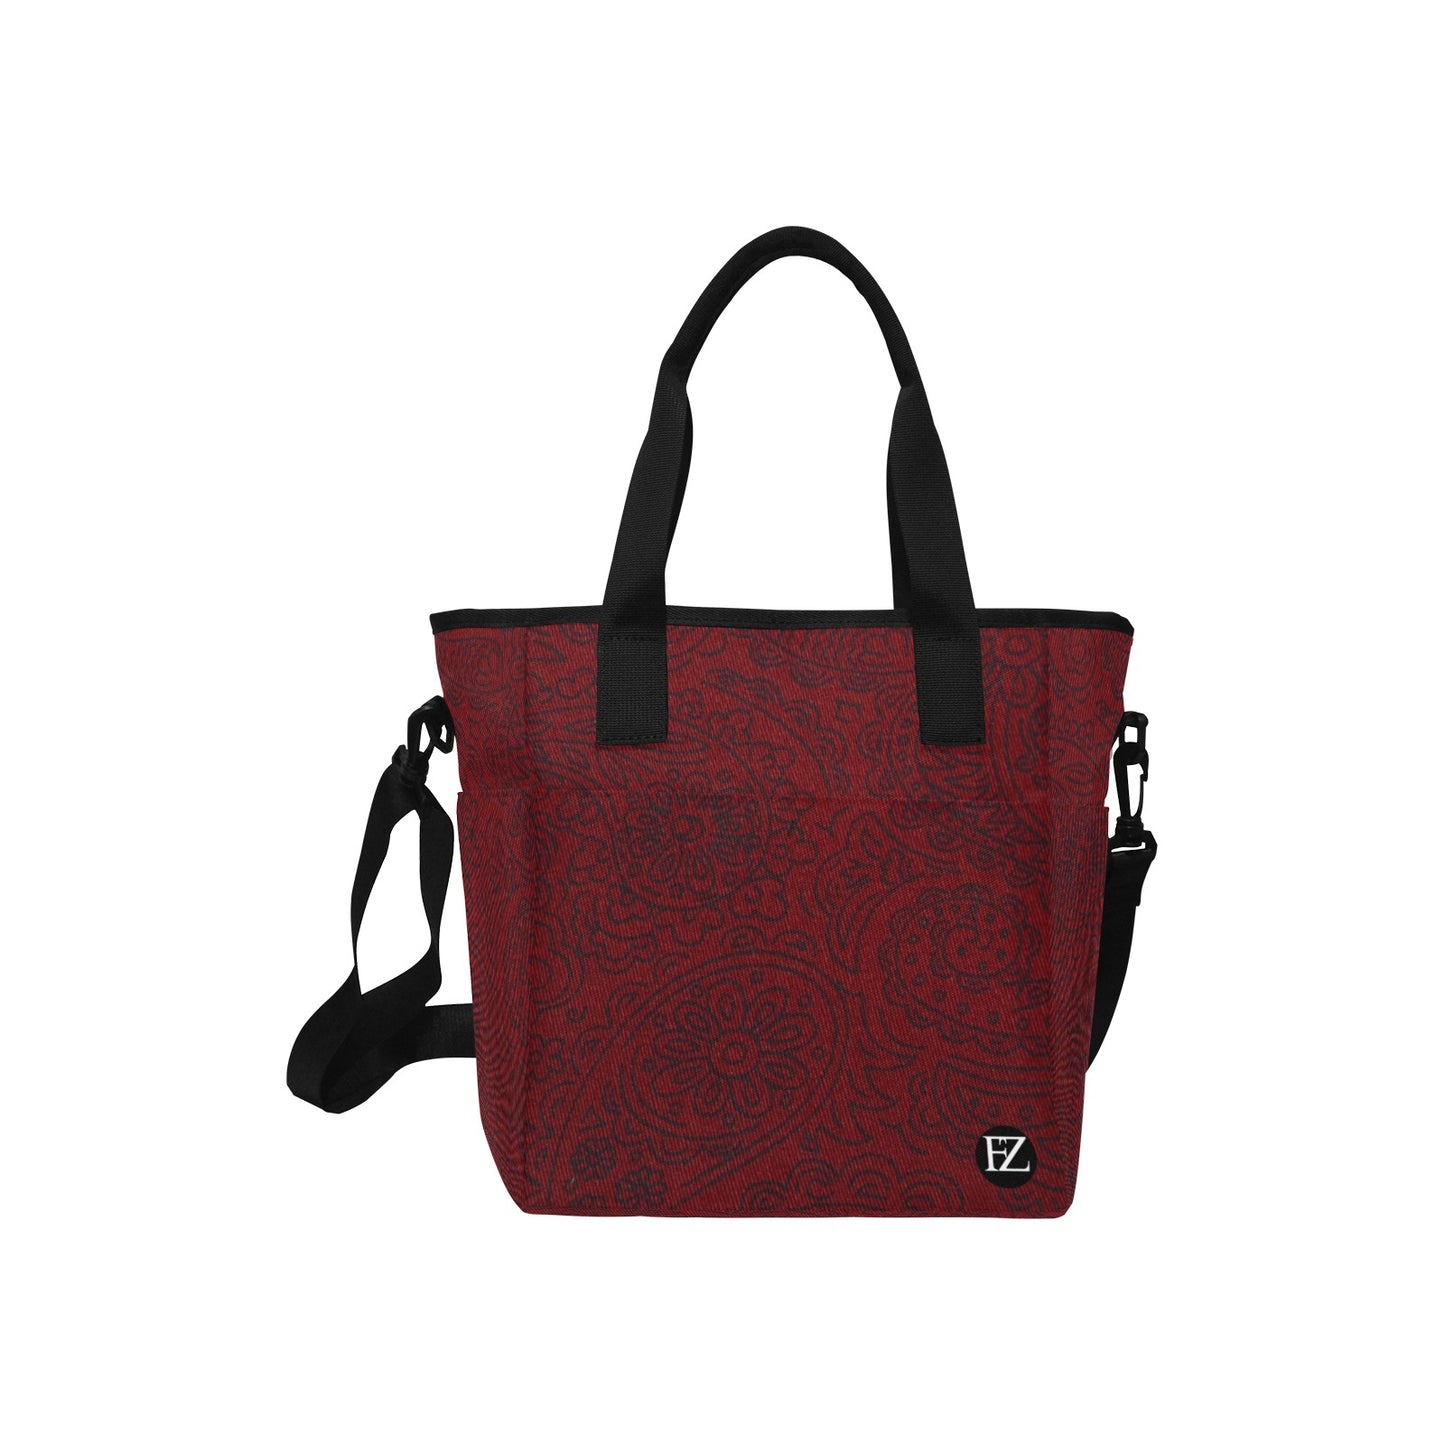 fz lunch bag - abstract 2 insulated lunch tote bag with shoulder strap (model1724)